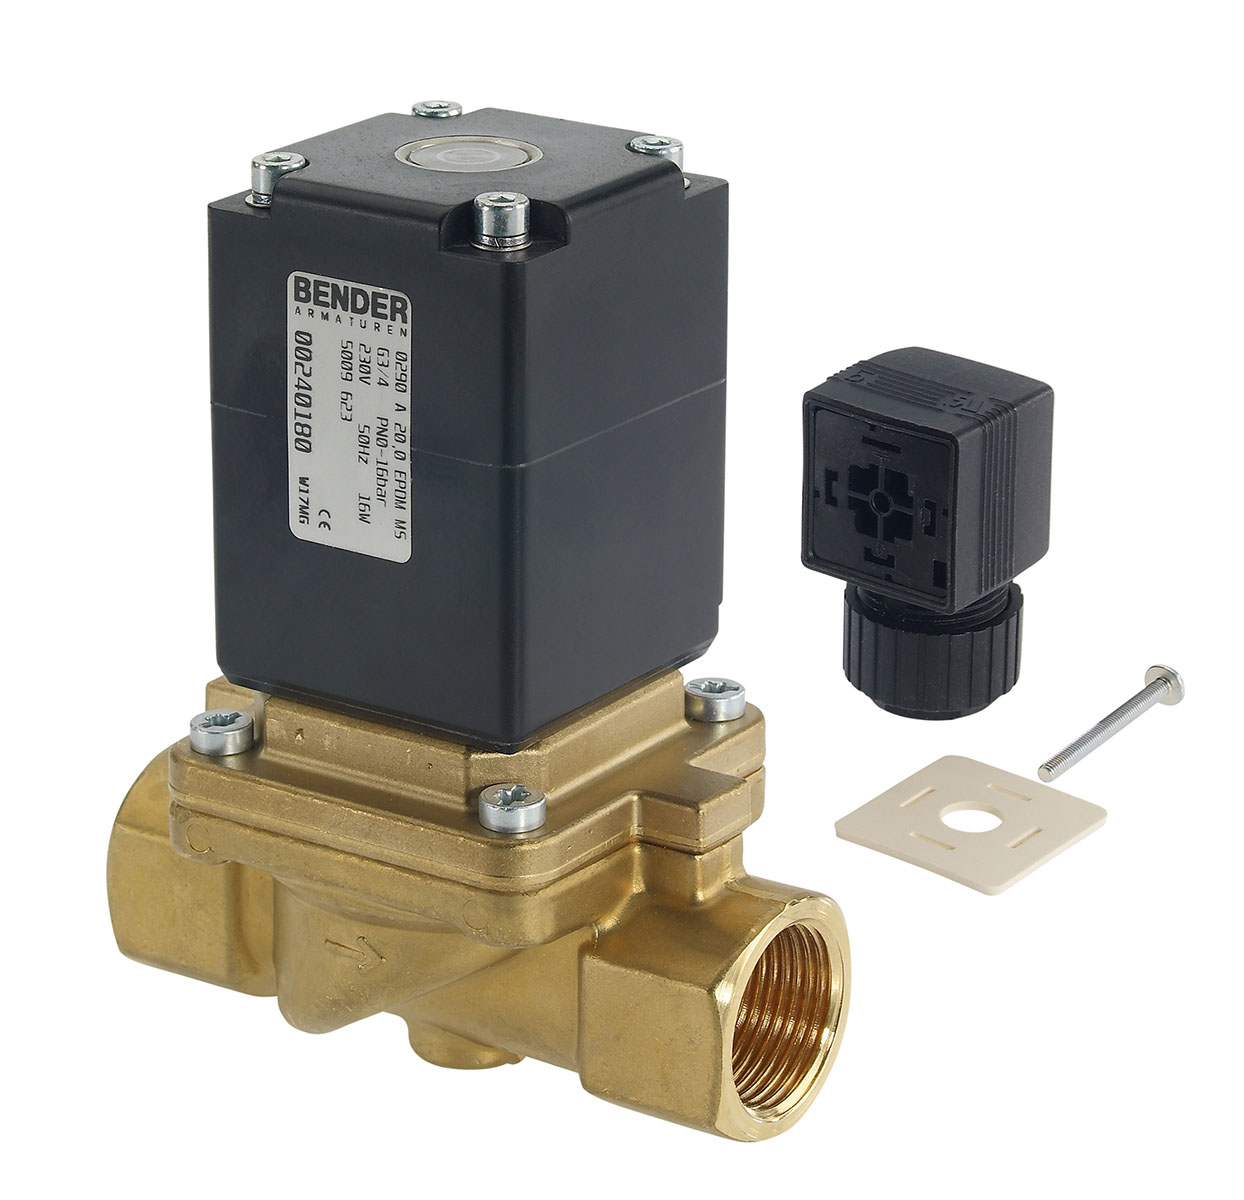 5009606 - 2/2 way solenoid valve normally closed for not flammable gas and fluids Type 6; female thread